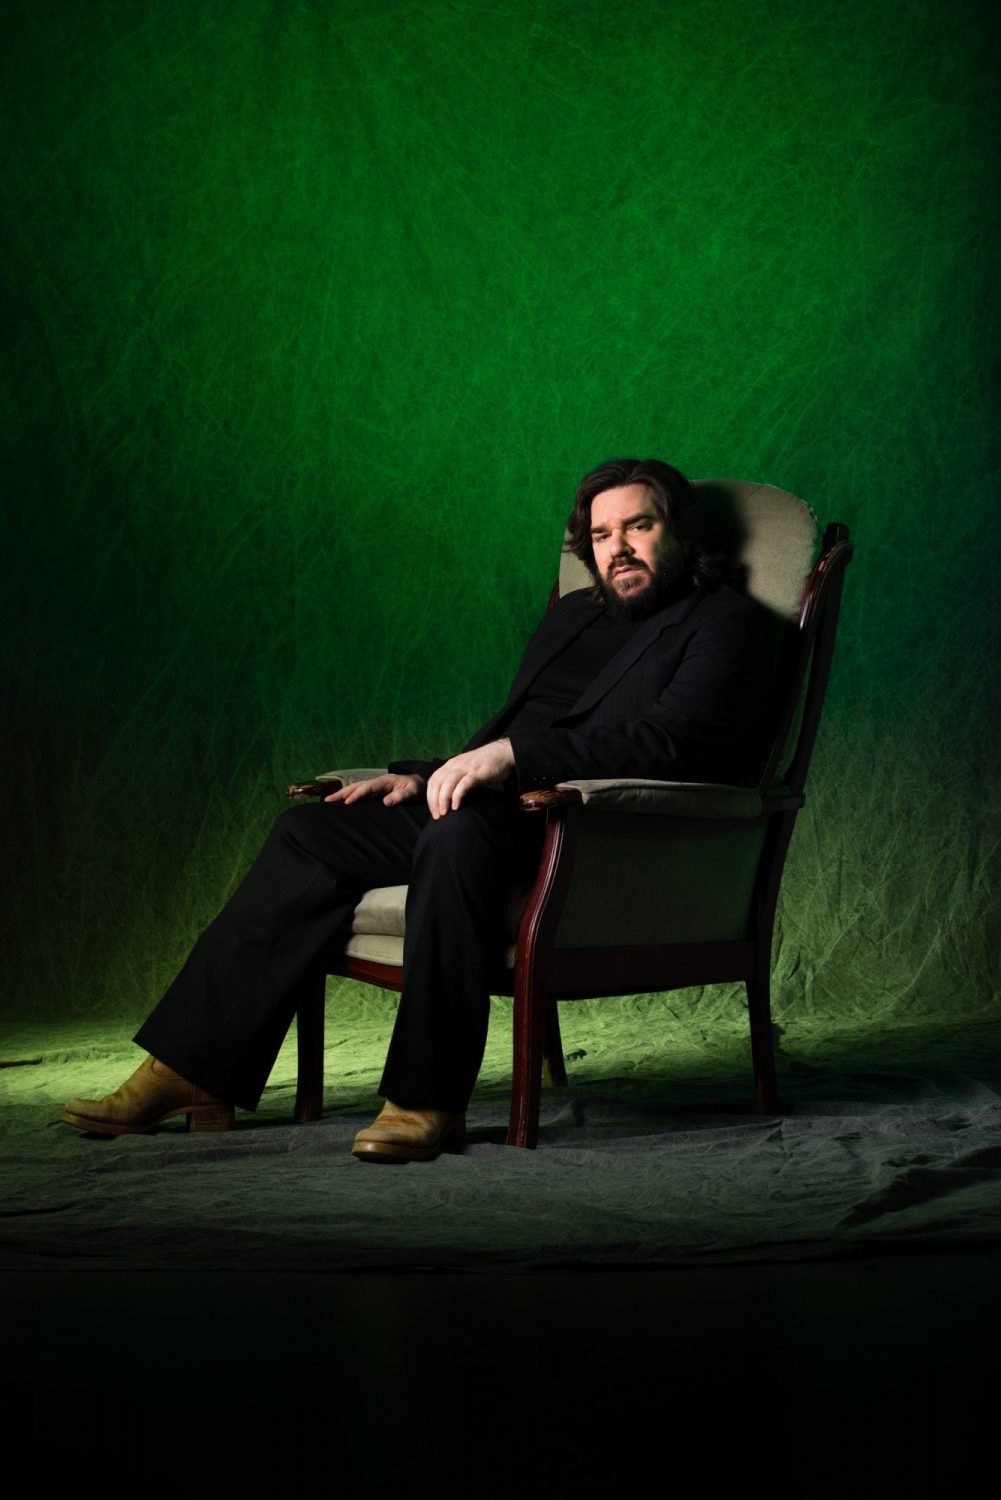 Matt Berry To Release “The Small Hours” On Sept. 16, Talks Music, Comedy & Art With Downtown